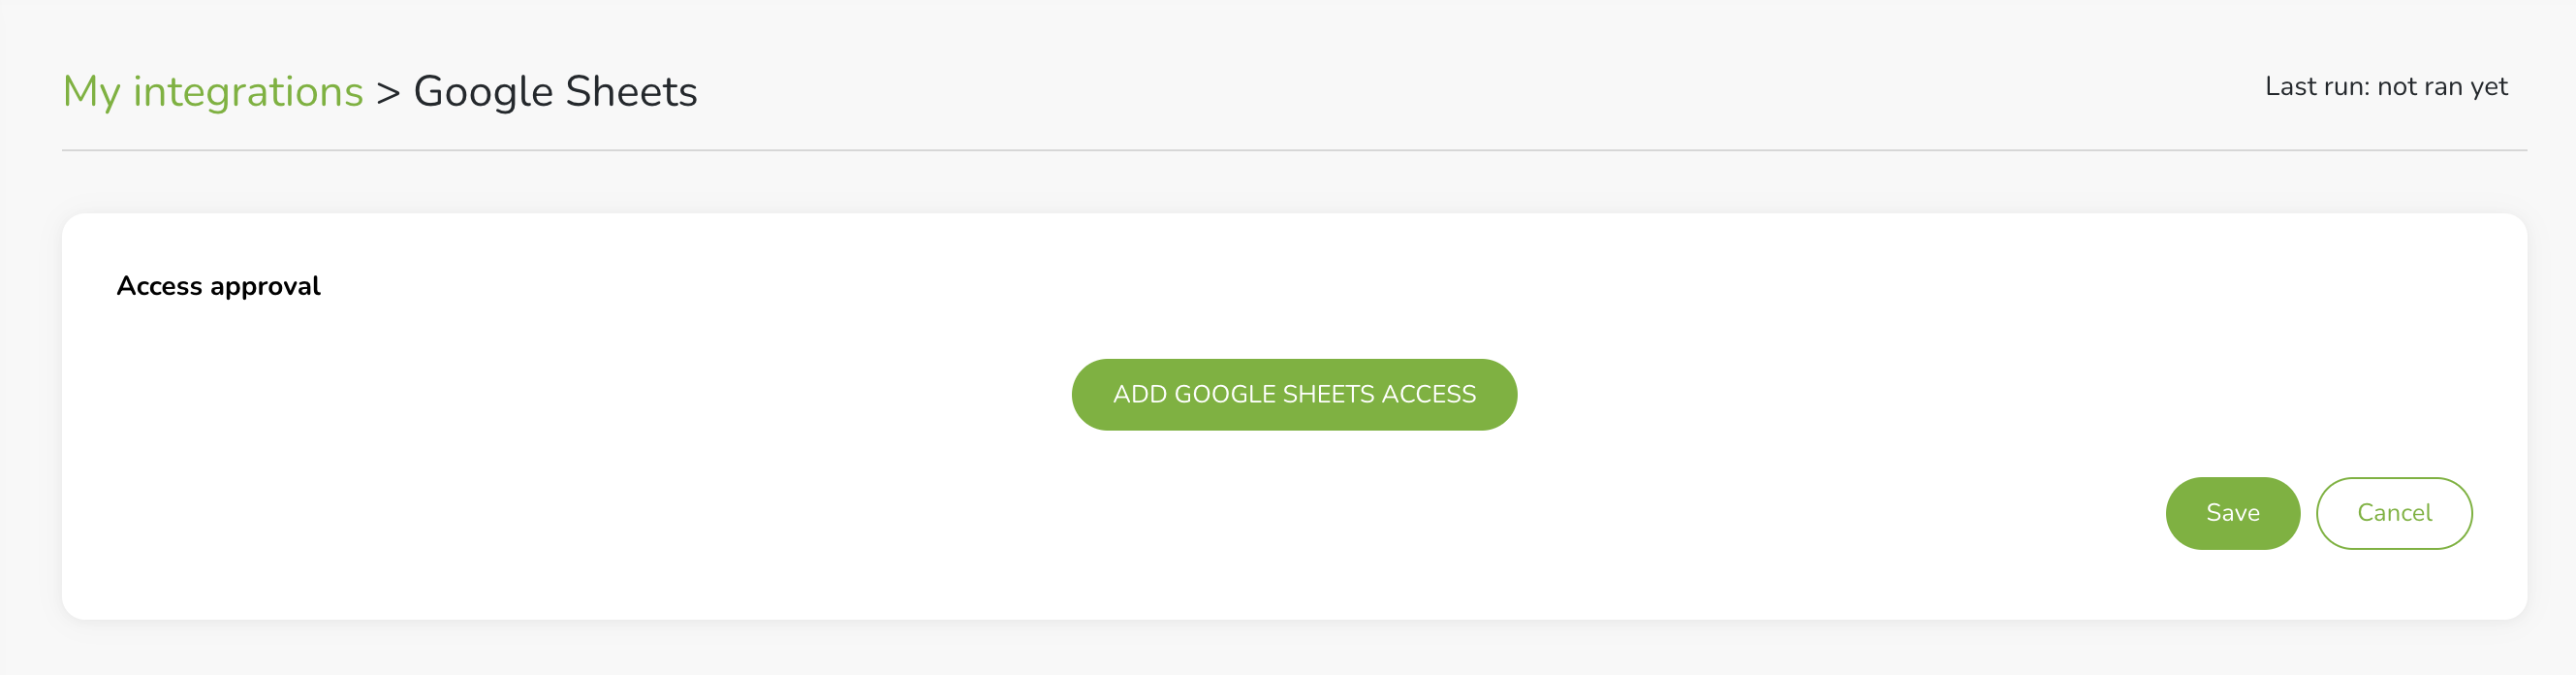 Granting access Sage Data to your Google Account